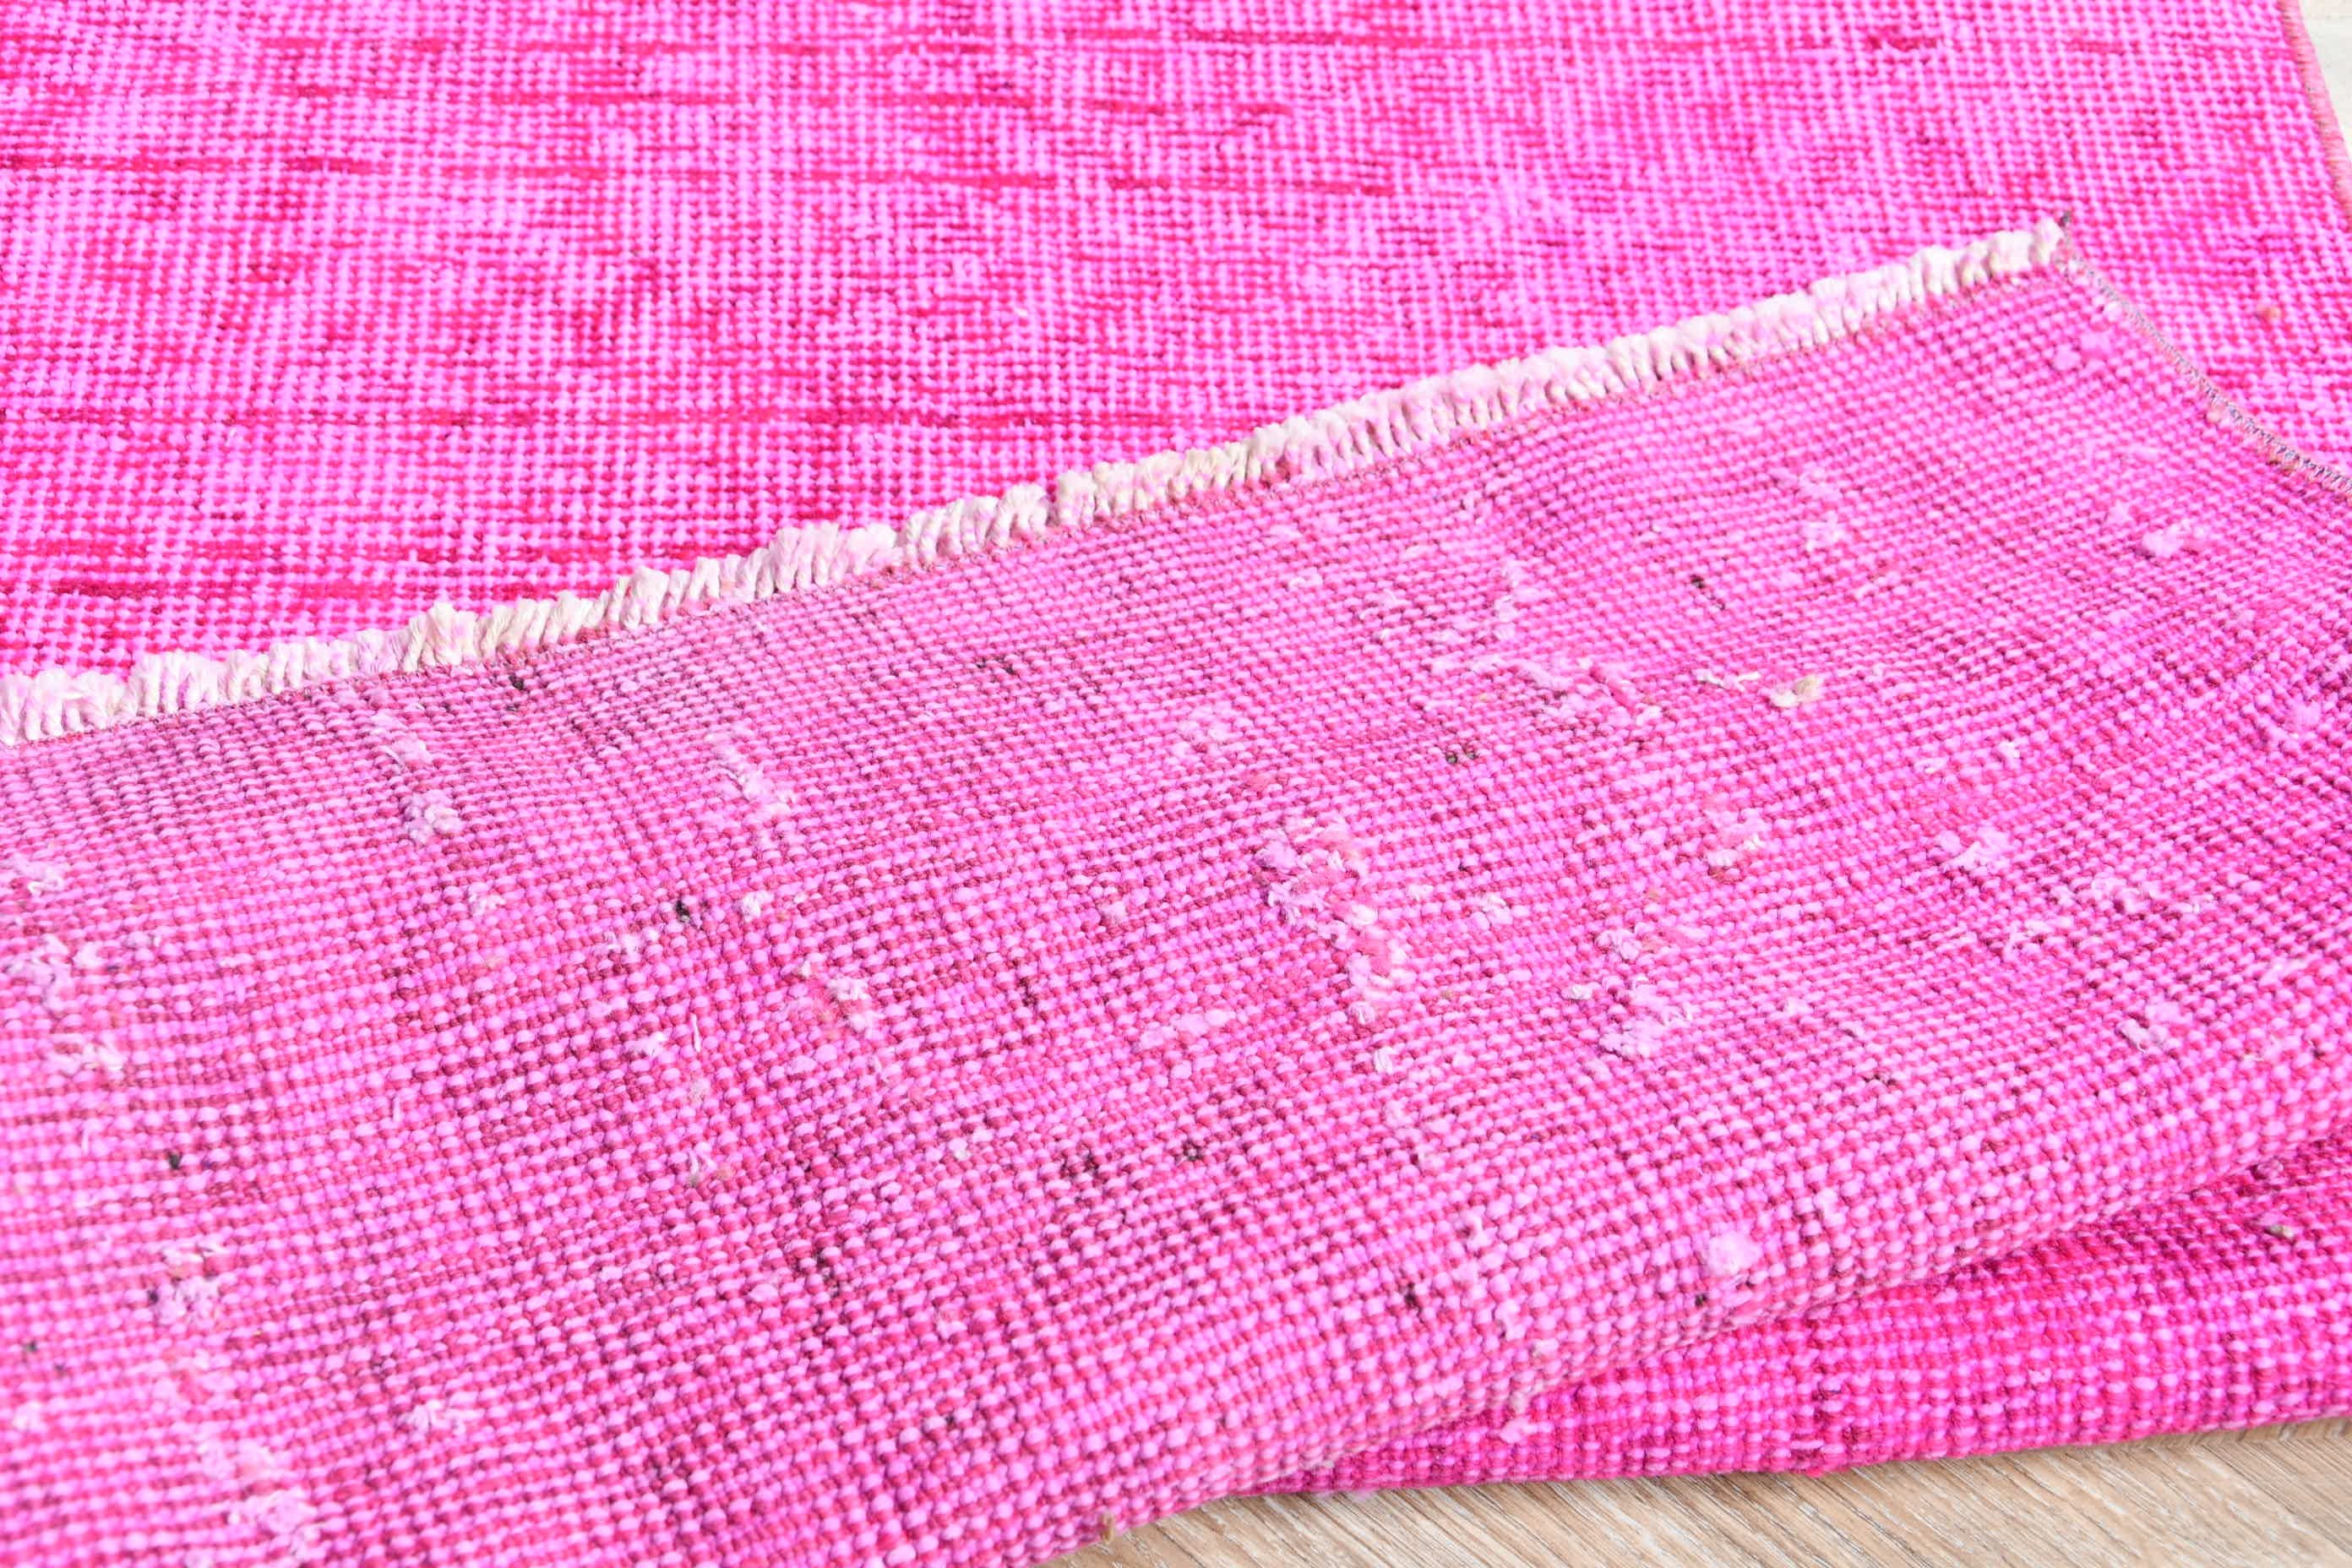 Entry Rugs, Kitchen Rug, Organic Rug, Anatolian Rug, Moroccan Rugs, Pink  3.6x6.5 ft Accent Rug, Turkish Rugs, Vintage Rug